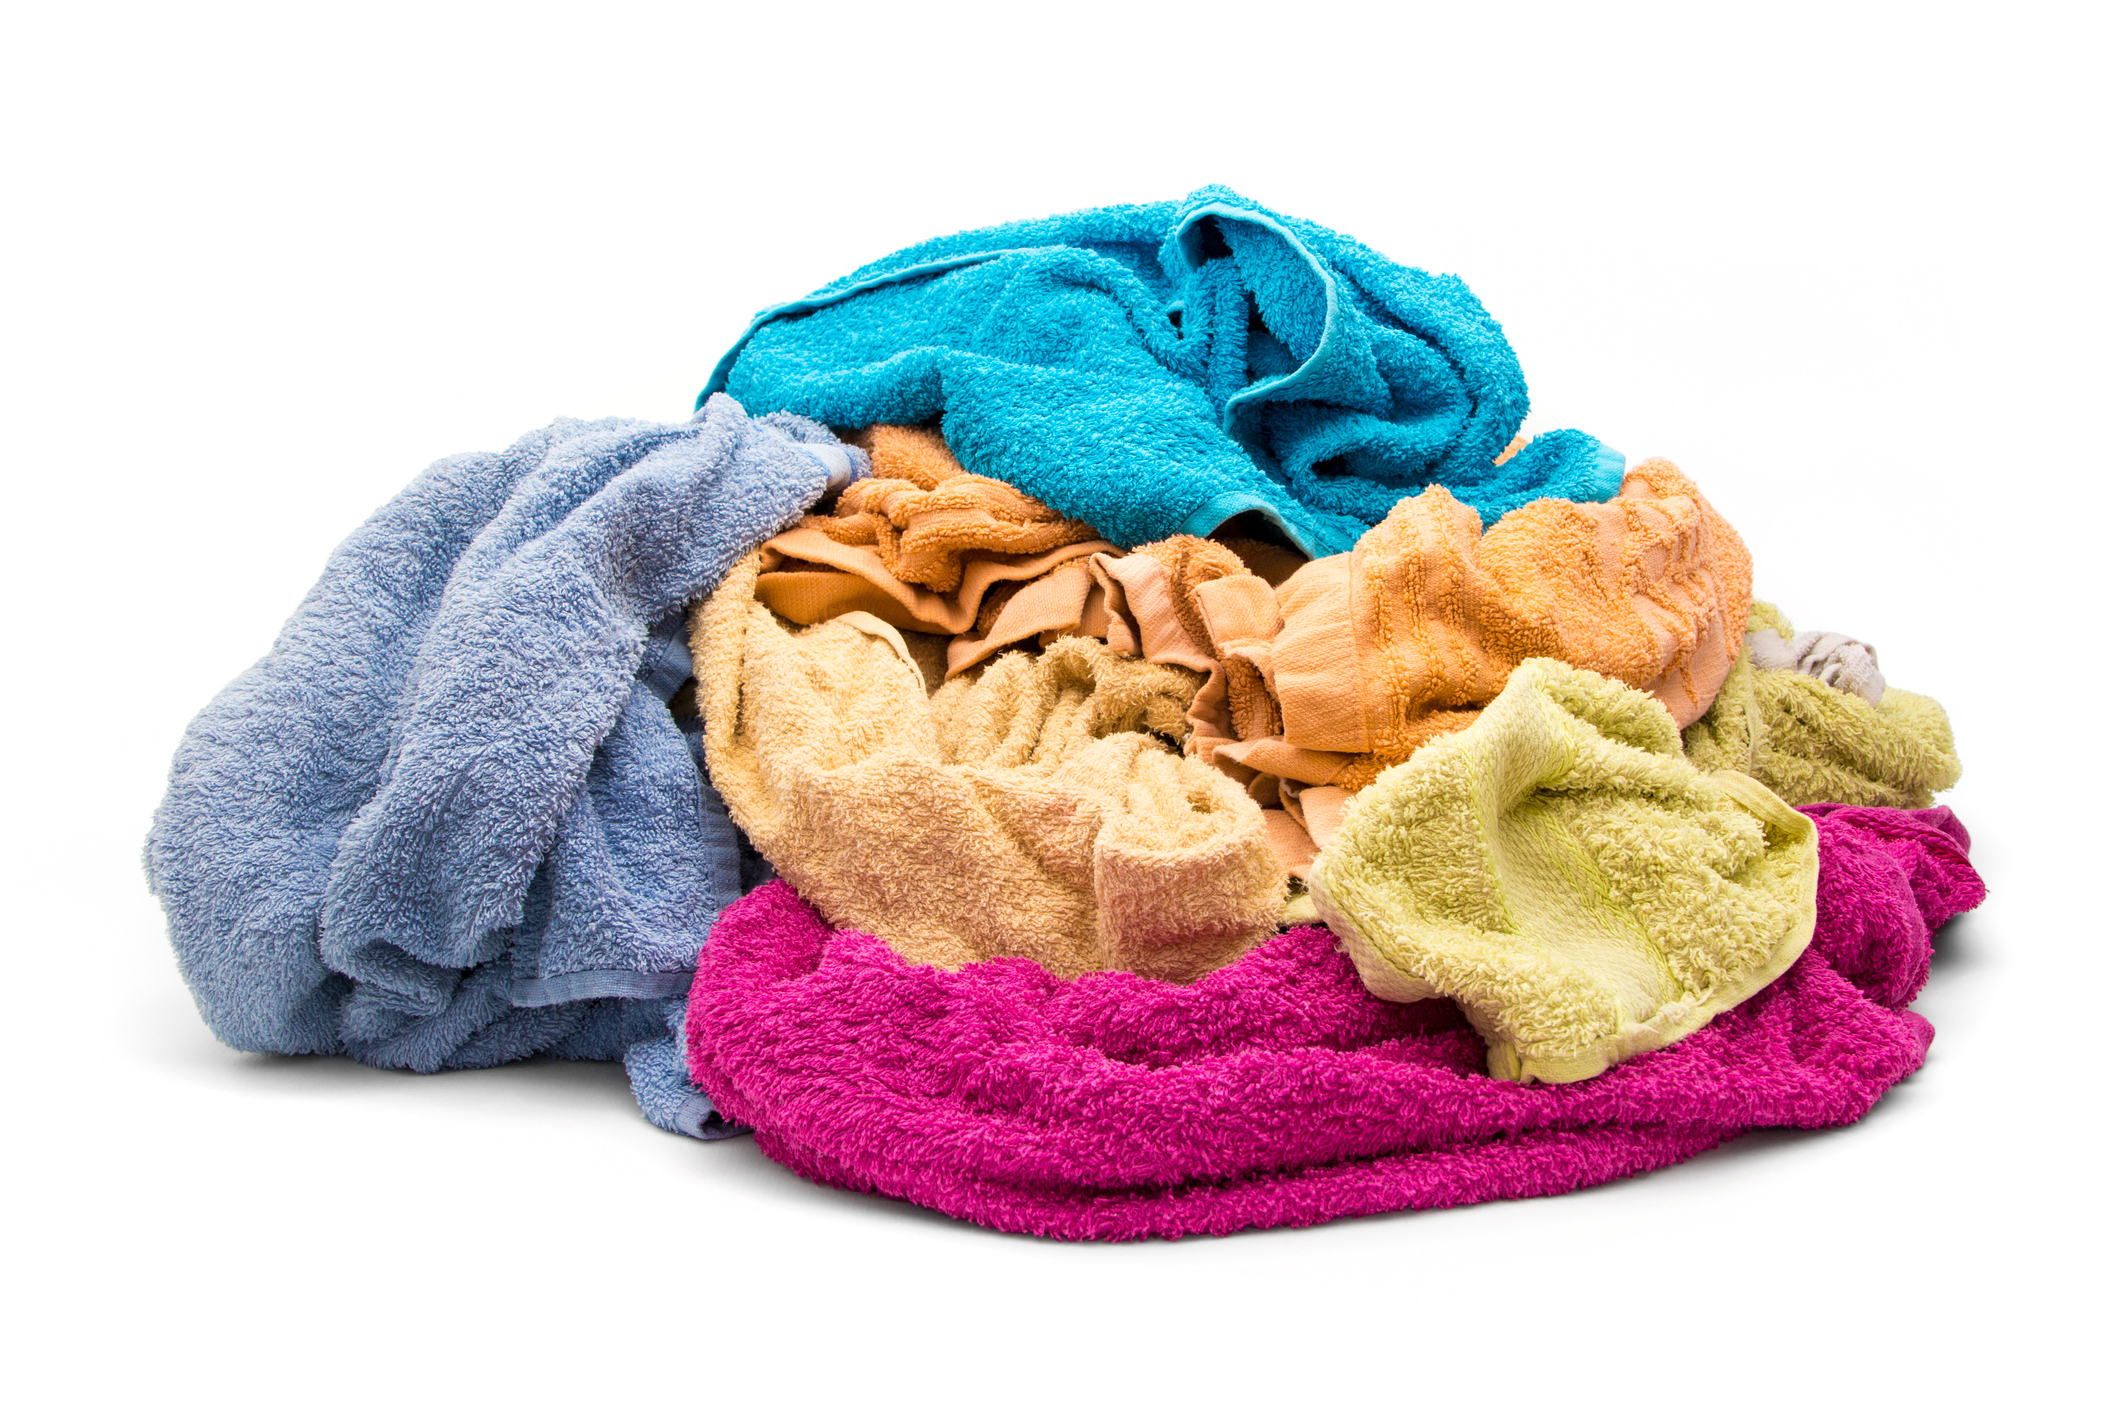 A pile of towels